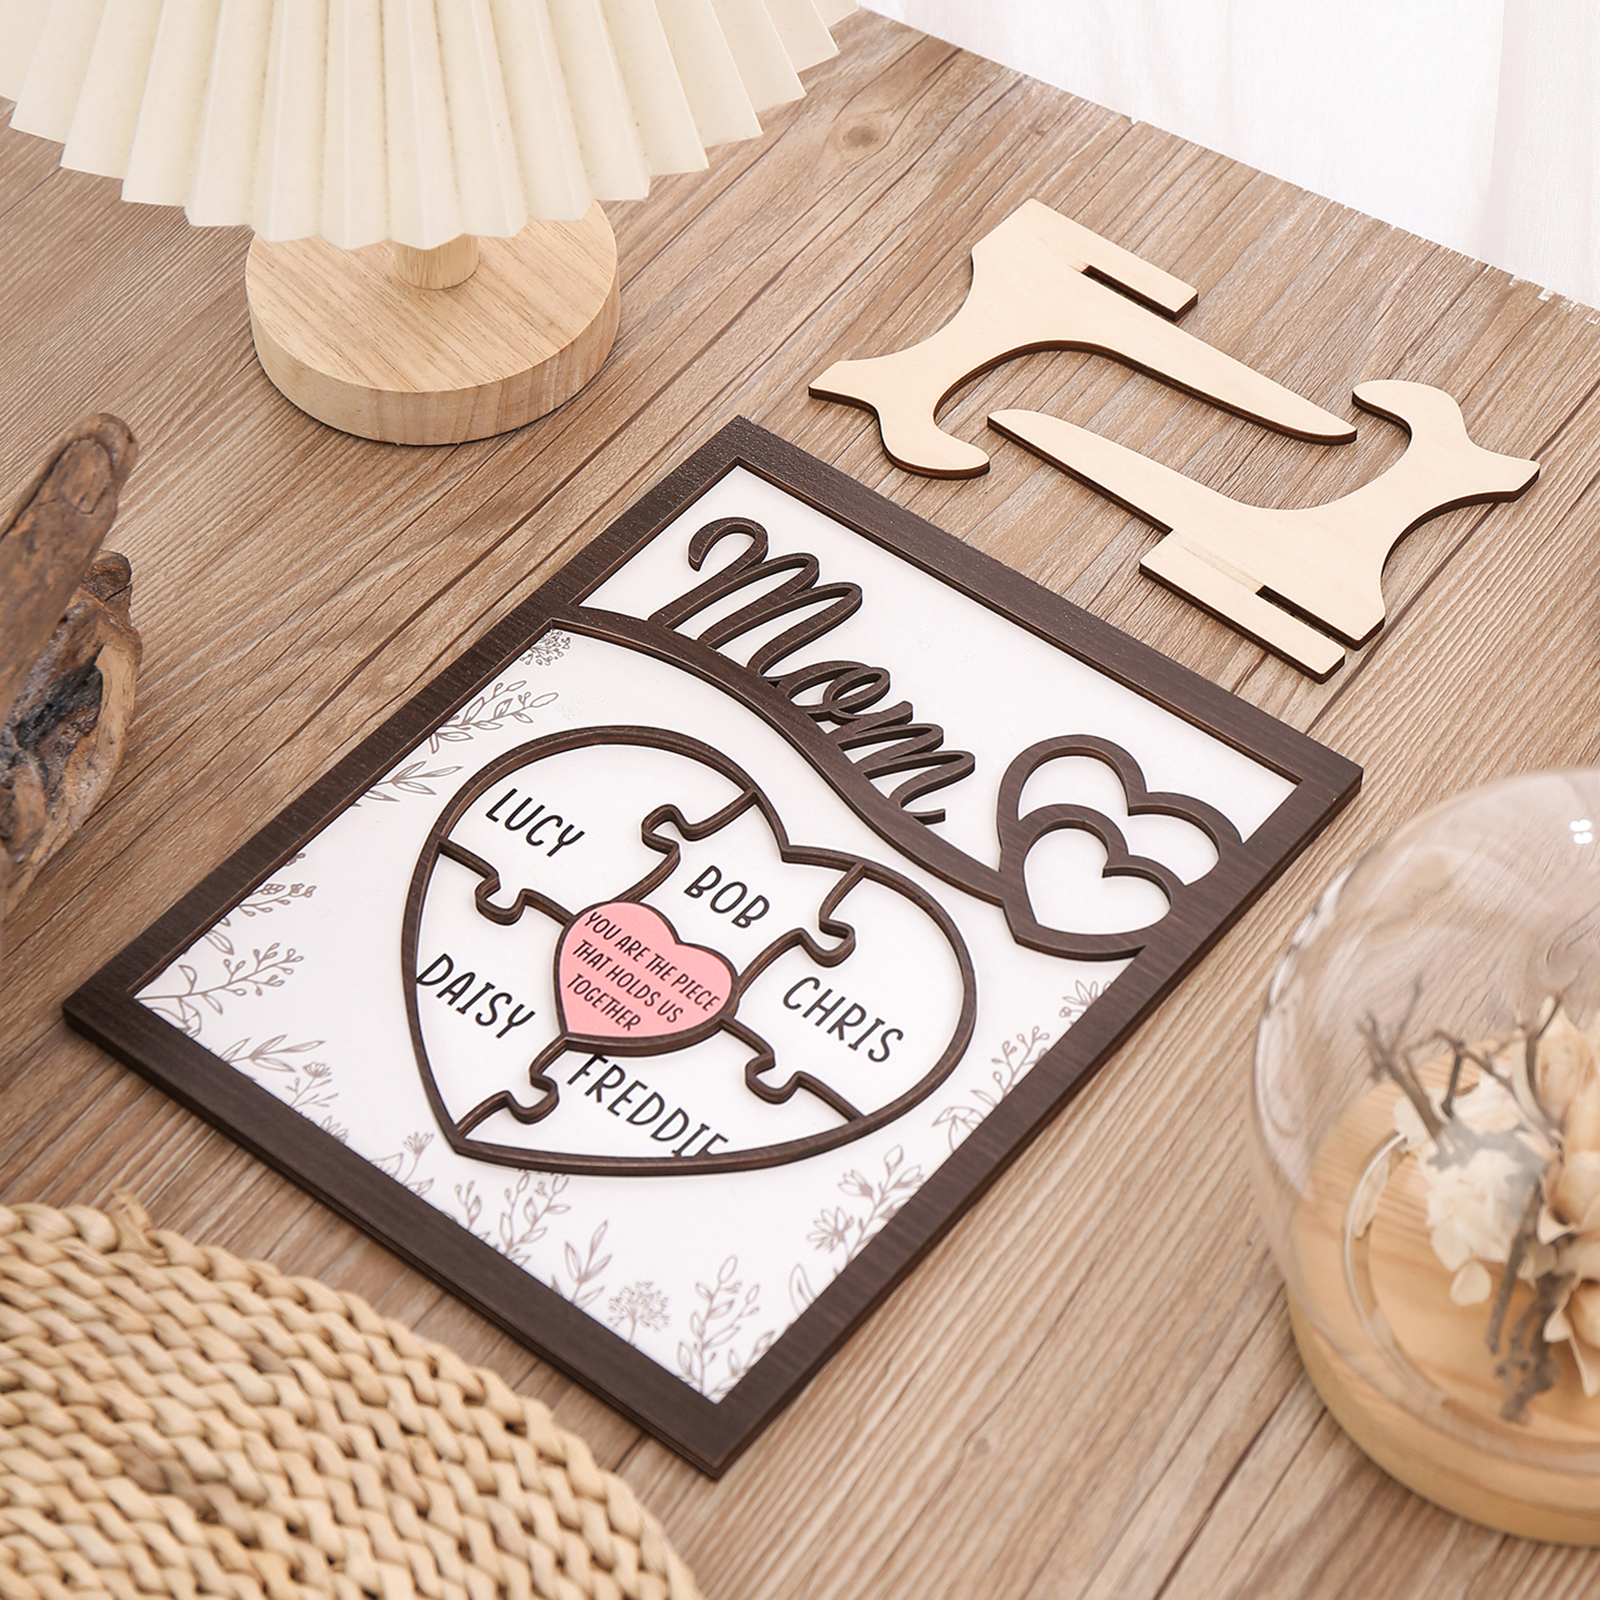 5 Names - Personalized Home Frame Wooden Decoration Customizable with 2 Texts, Love Pieces Wooden Board Painting for Mom